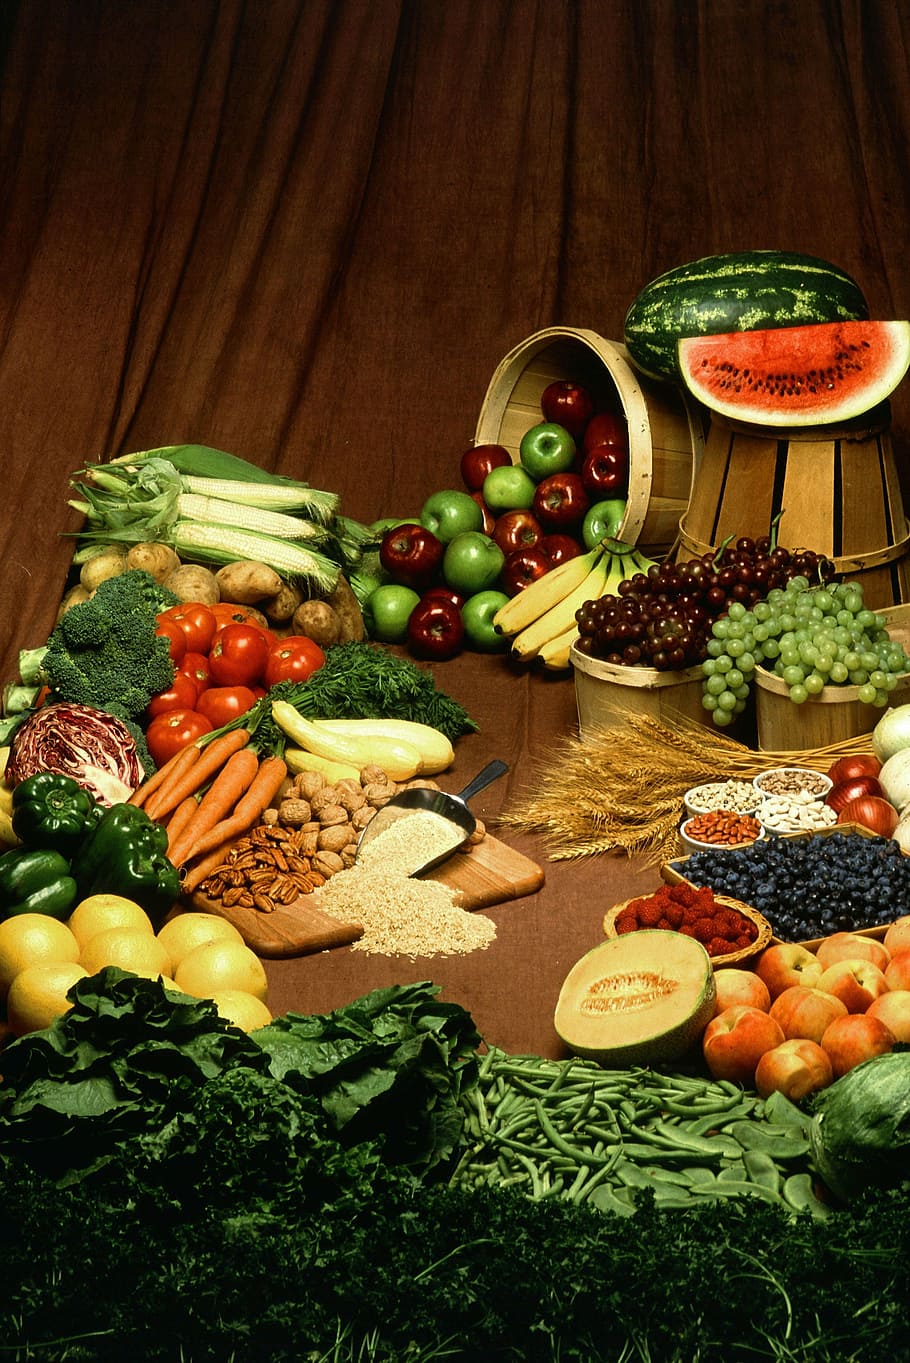 variety, fruits, vegetables, top, wooden, table, healthy eating, fruits and vegetables, food, produce